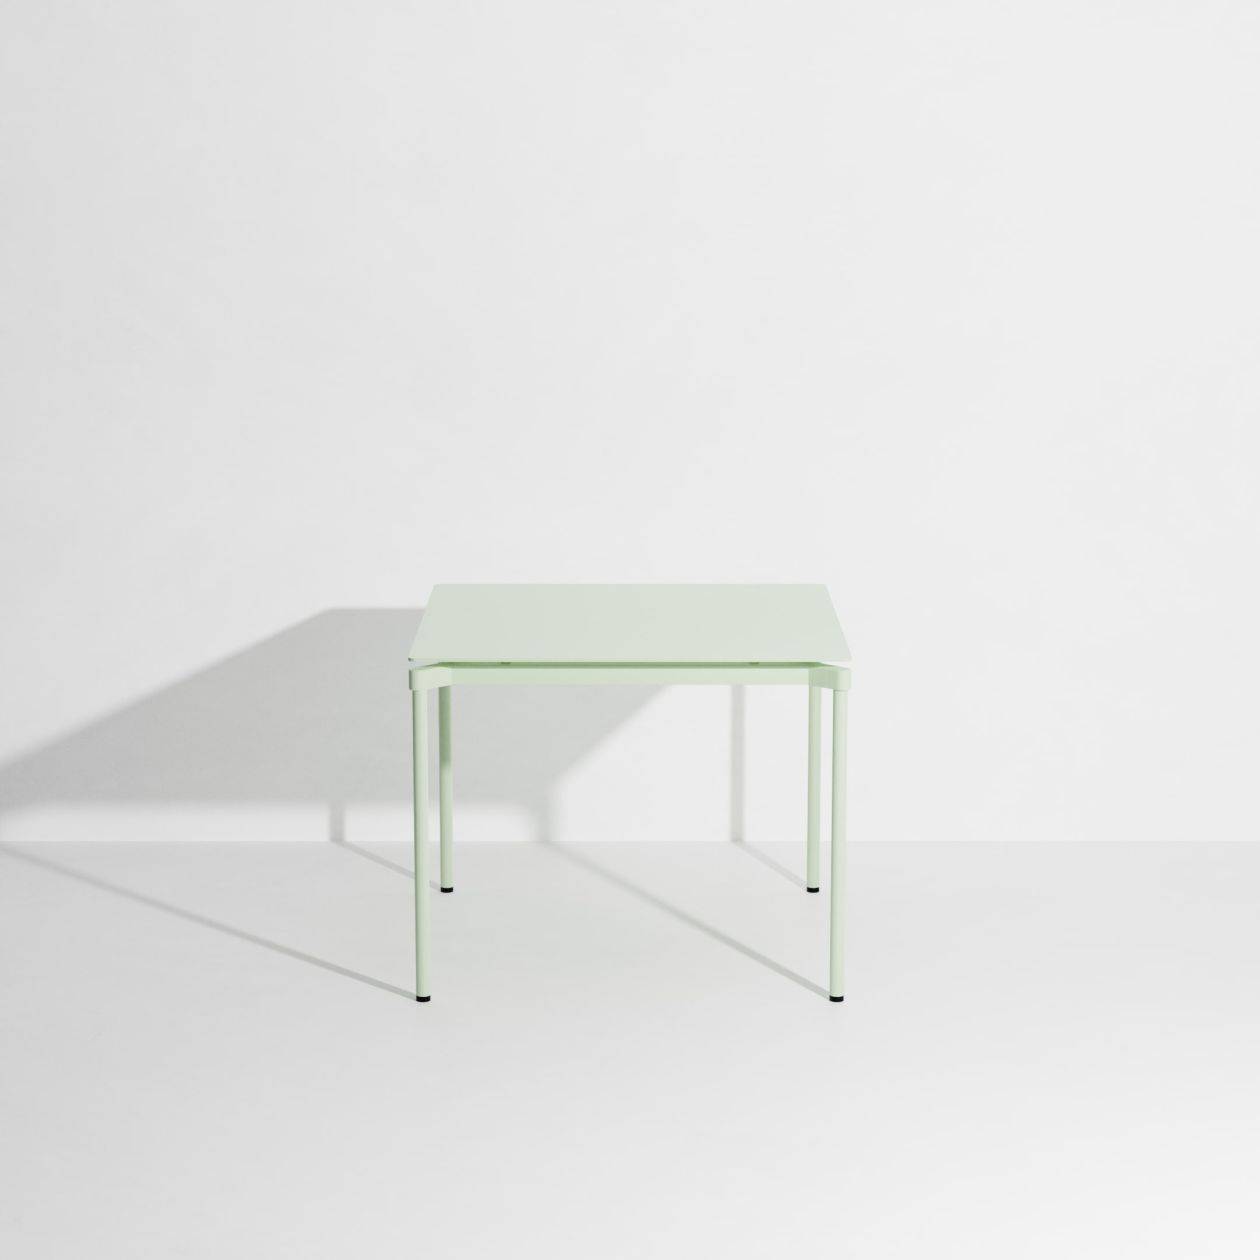 Fromme Square Table - Pastel green